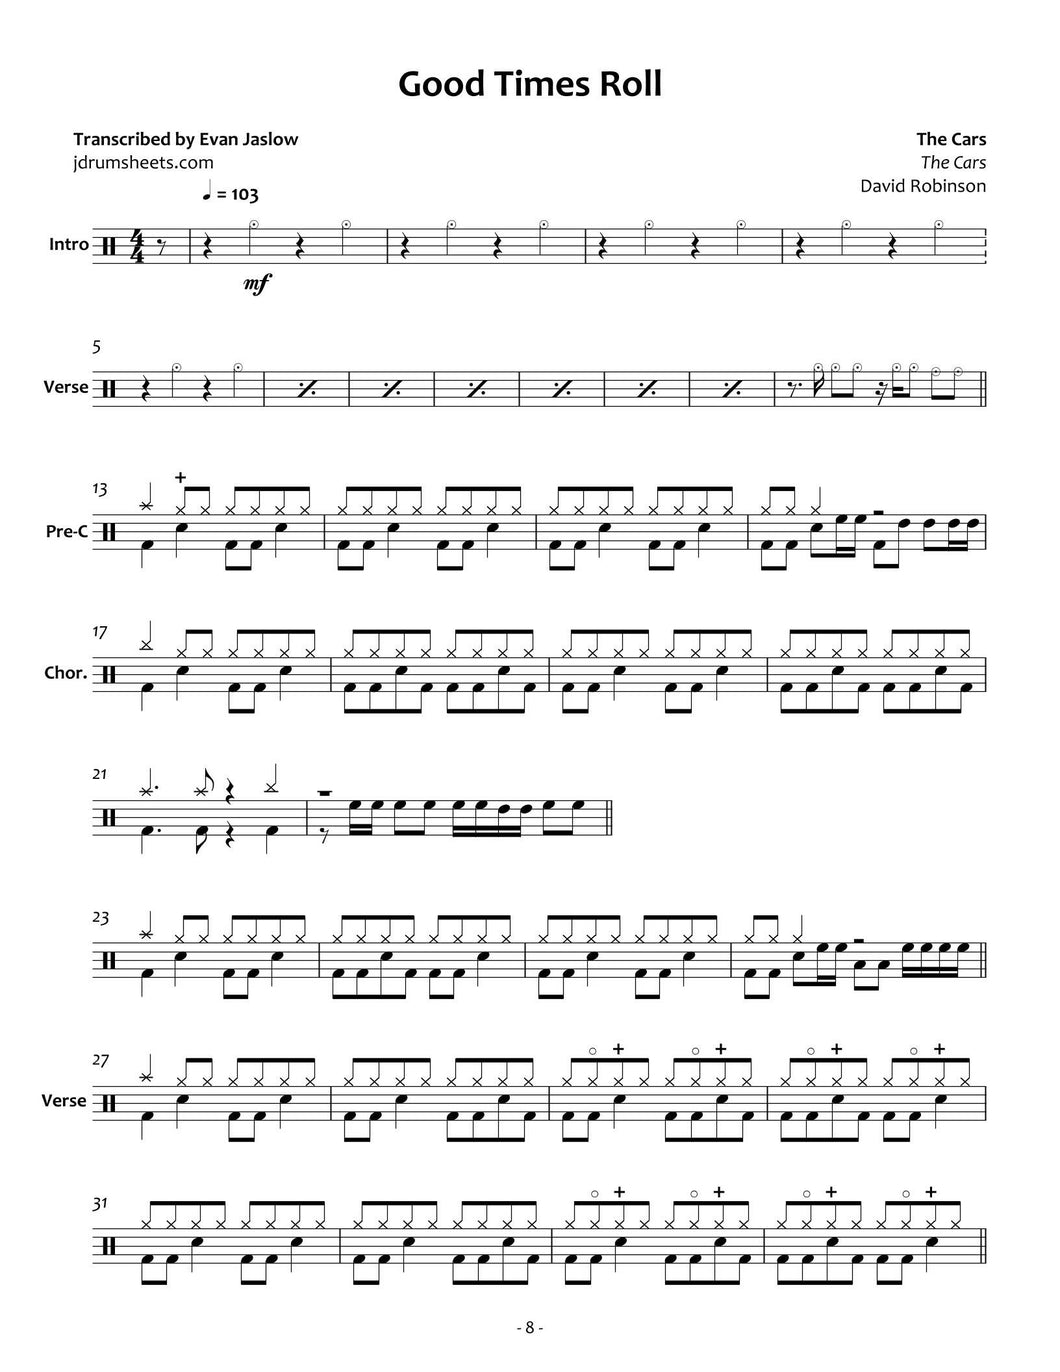 Good Times Roll - The Cars - Full Drum Transcription / Drum Sheet Music - Jaslow Drum Sheets